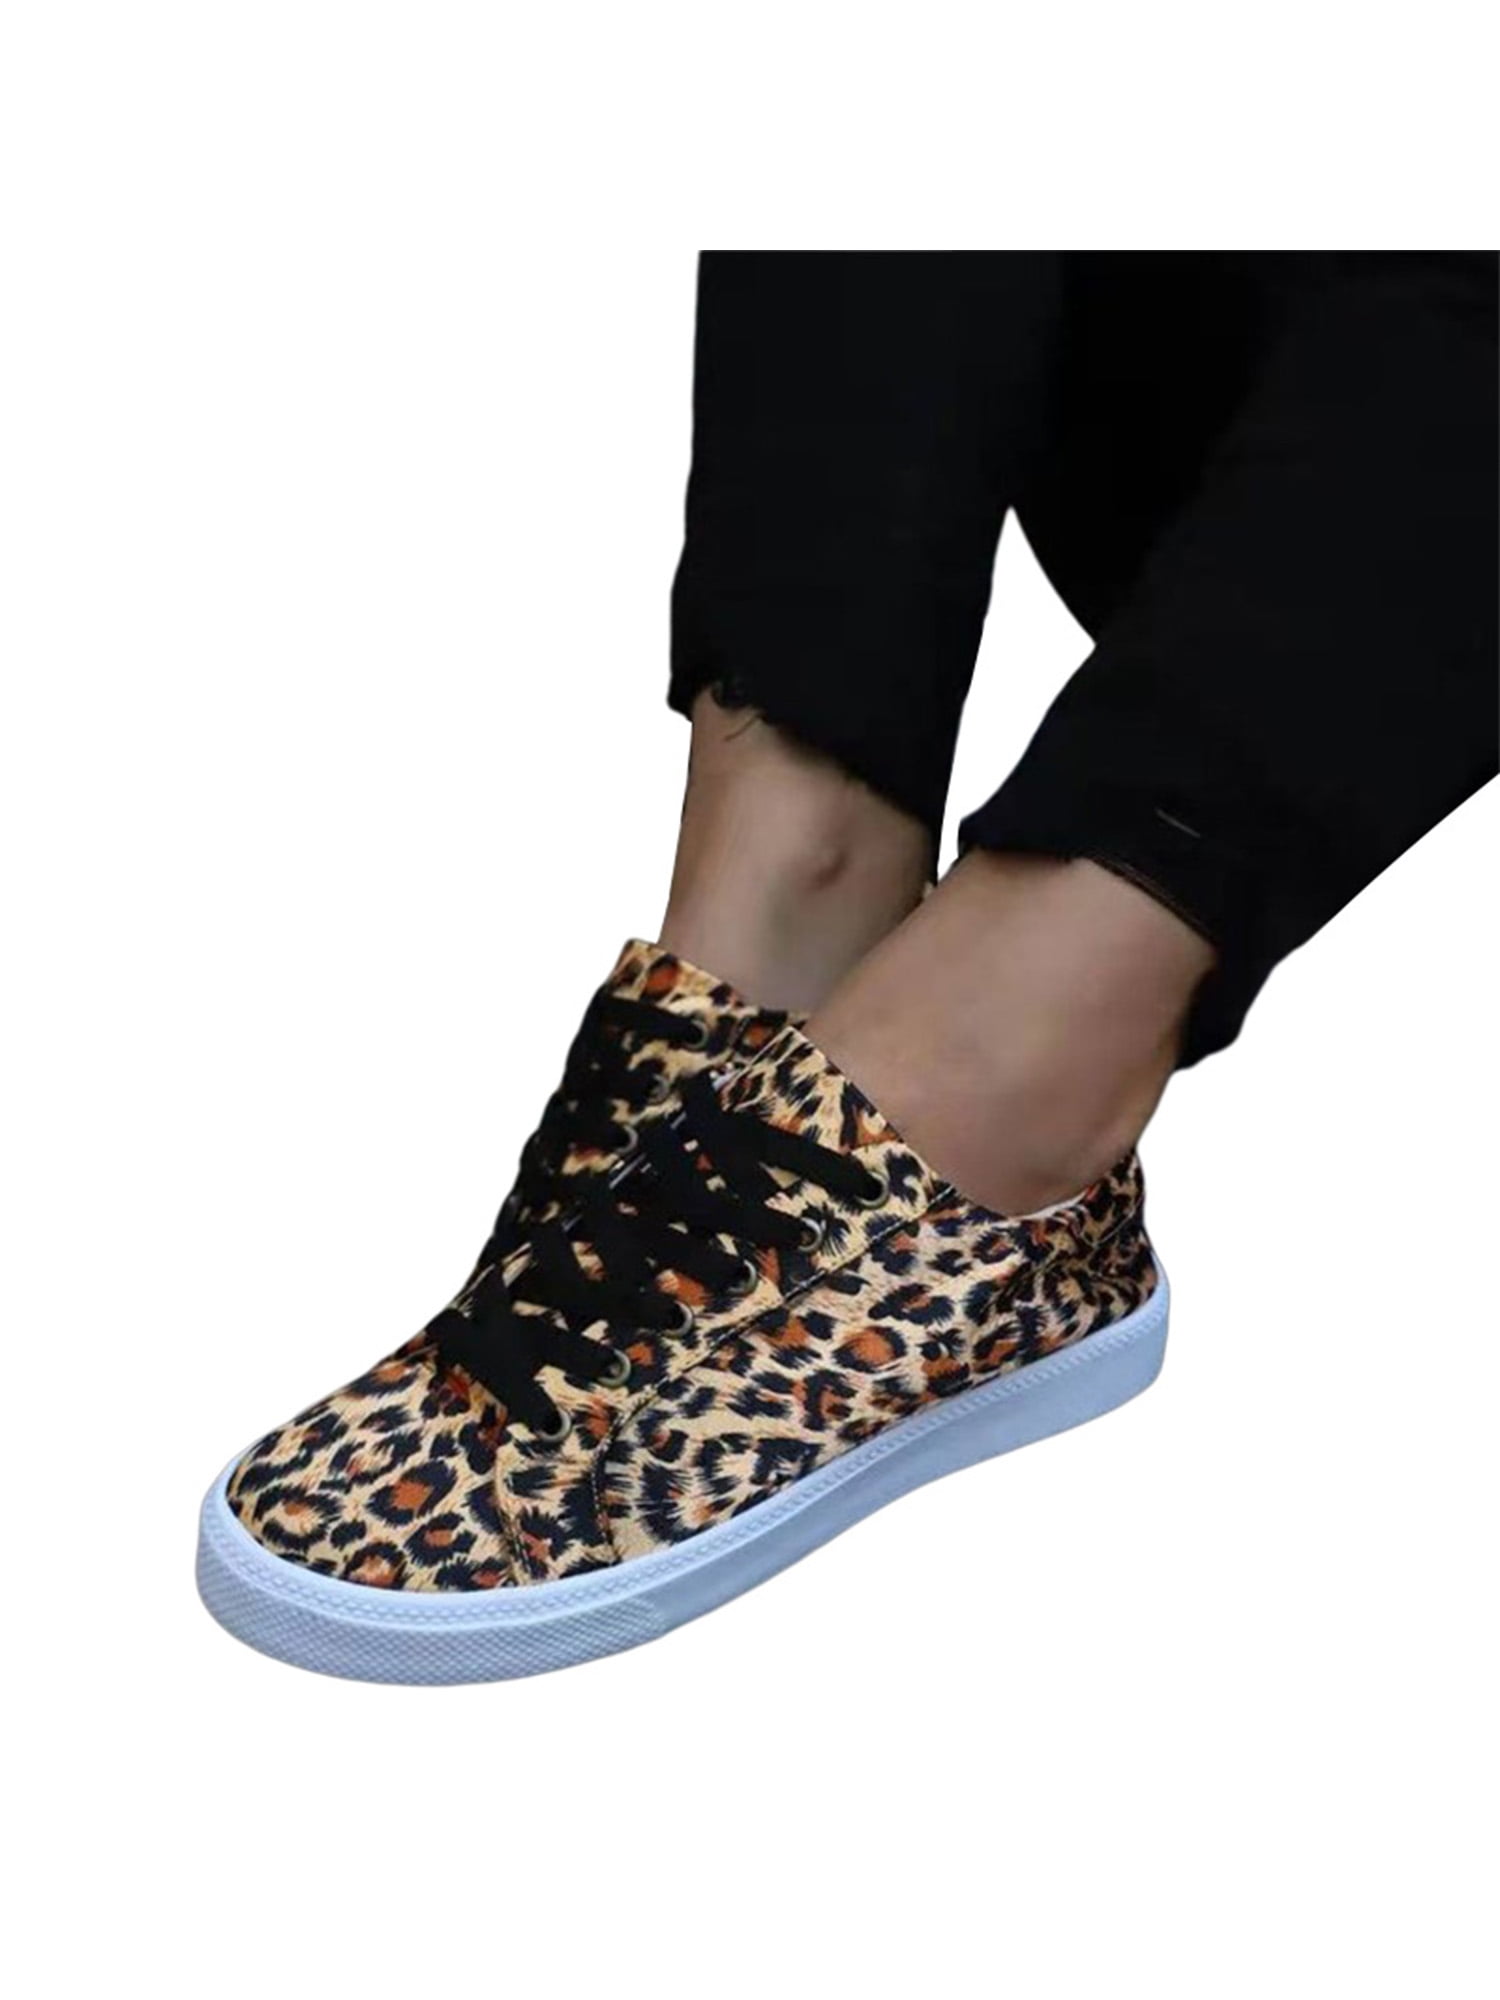 New Ladies Flower Embroidery Pumps Women Soft Bed Shoes Plimsols Trainers Boots 